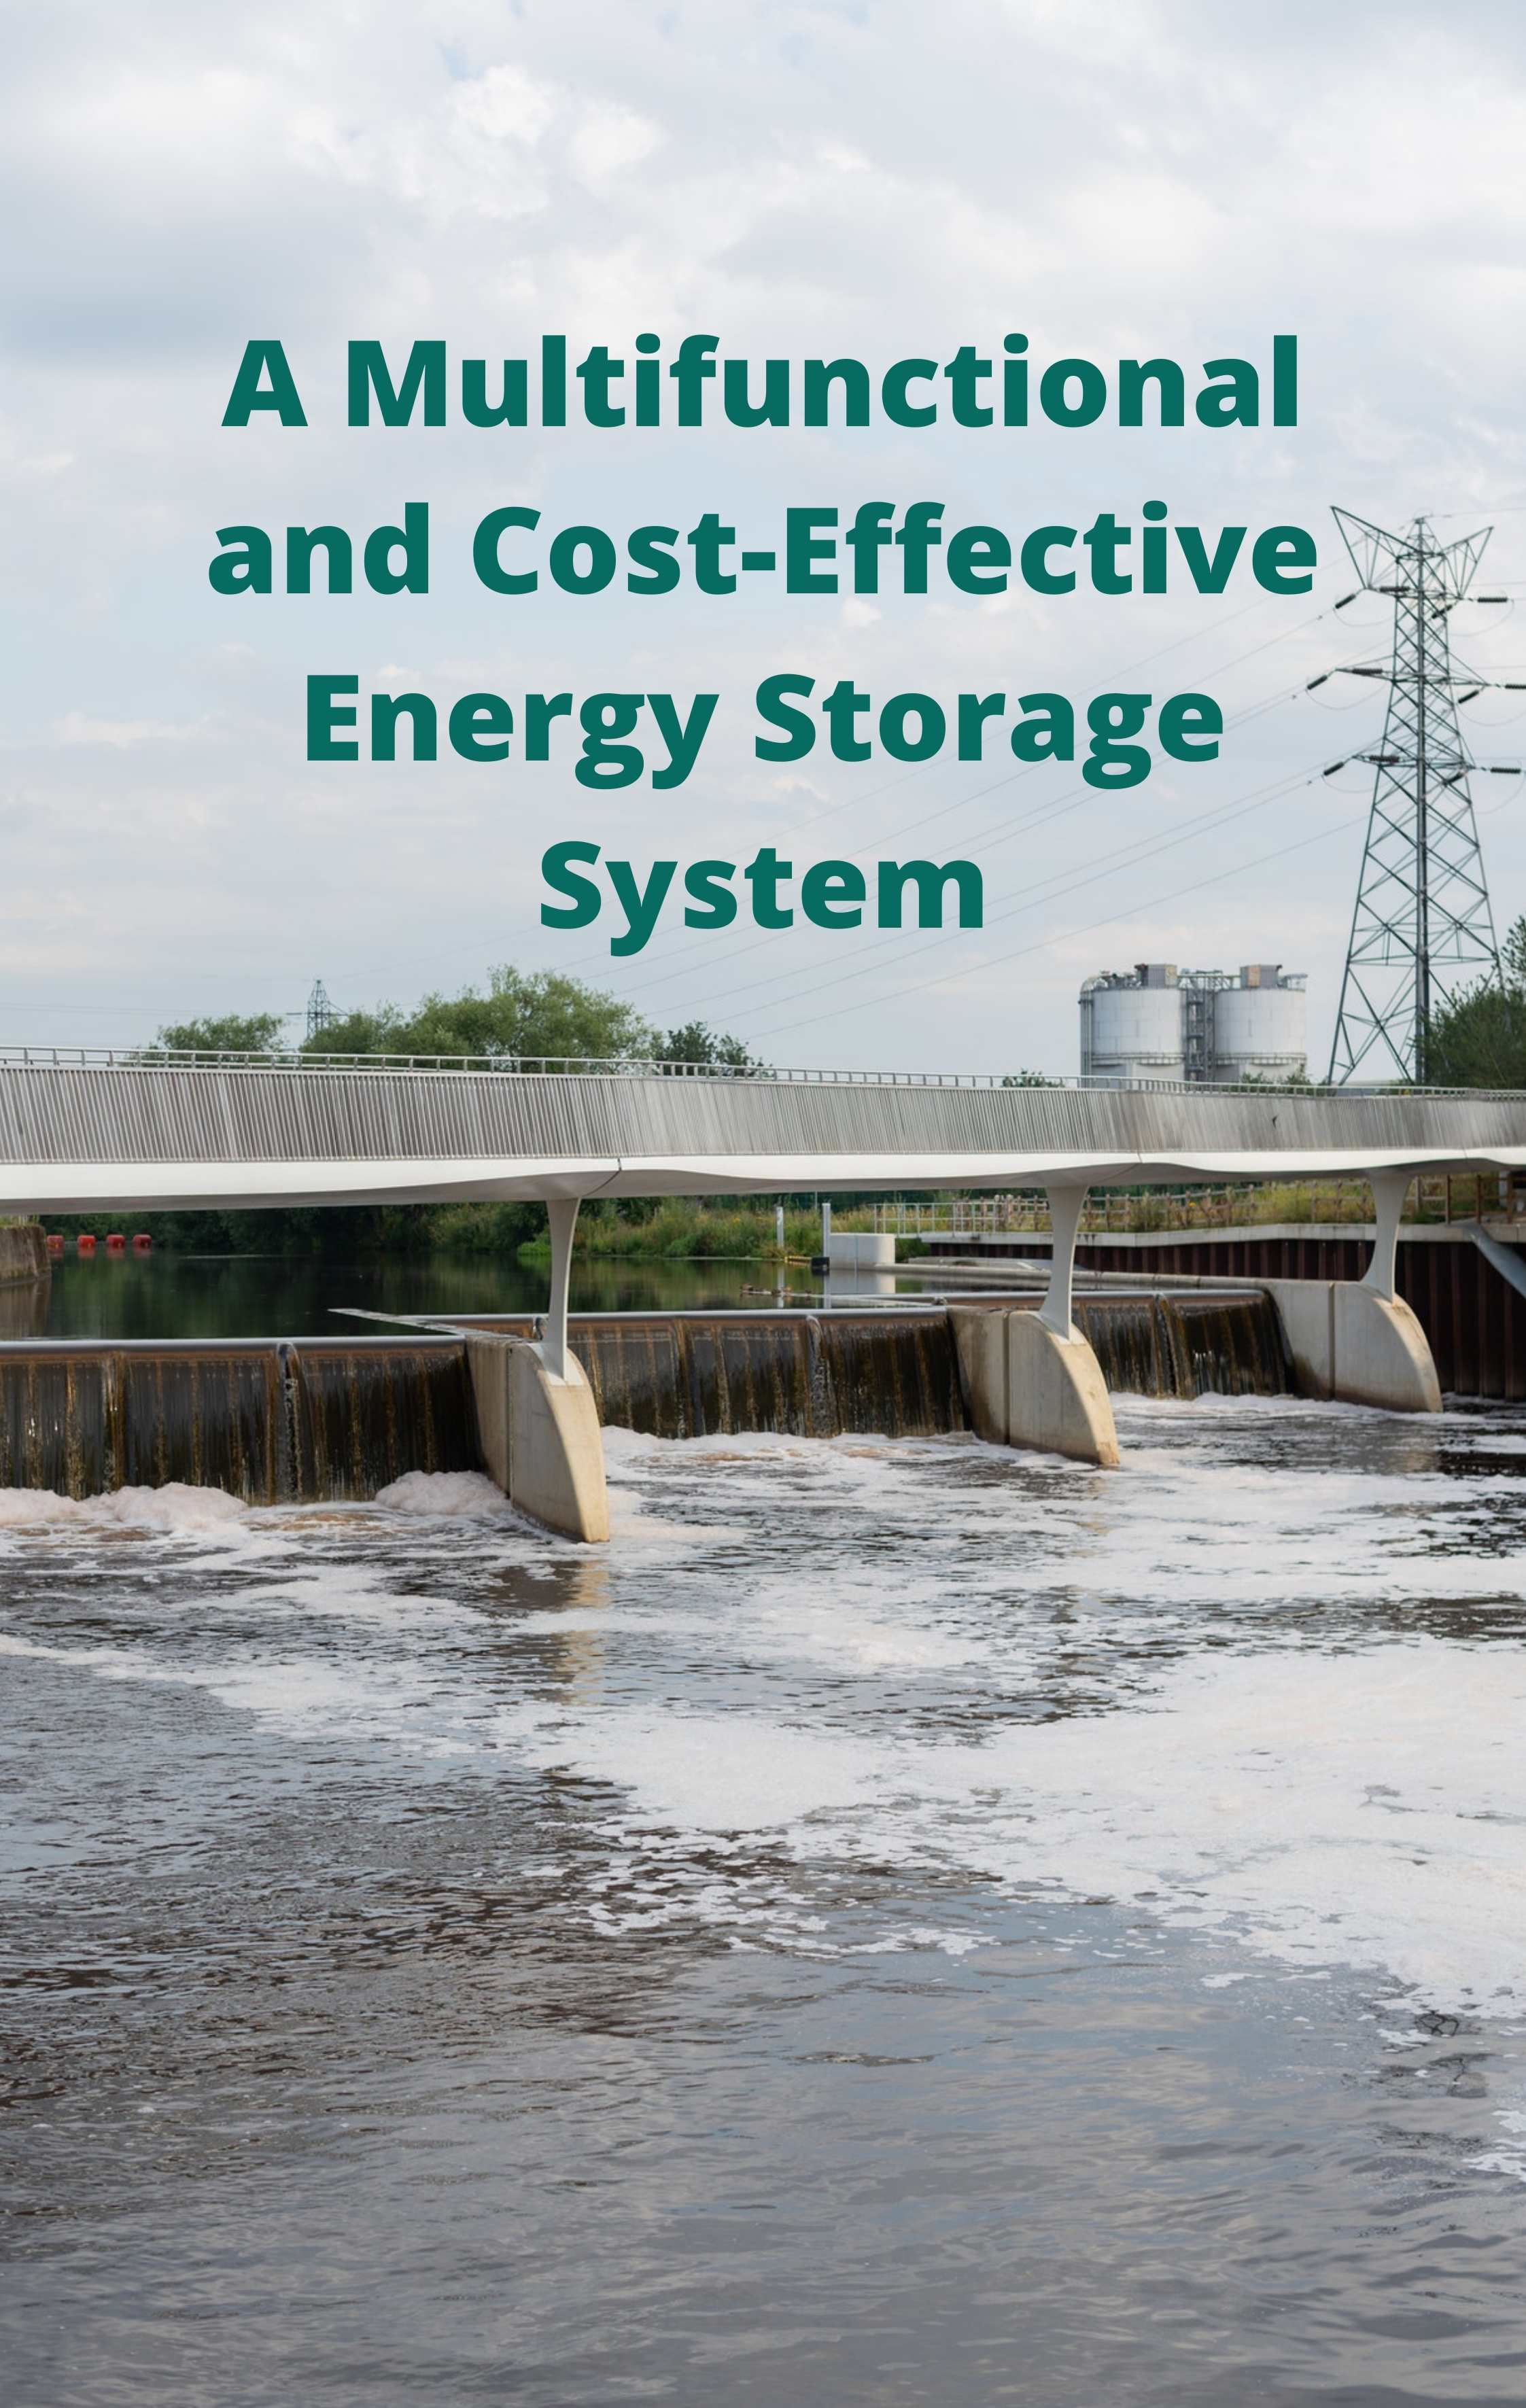 PHES: A Multifunctional and Cost-Effective Energy Storage System